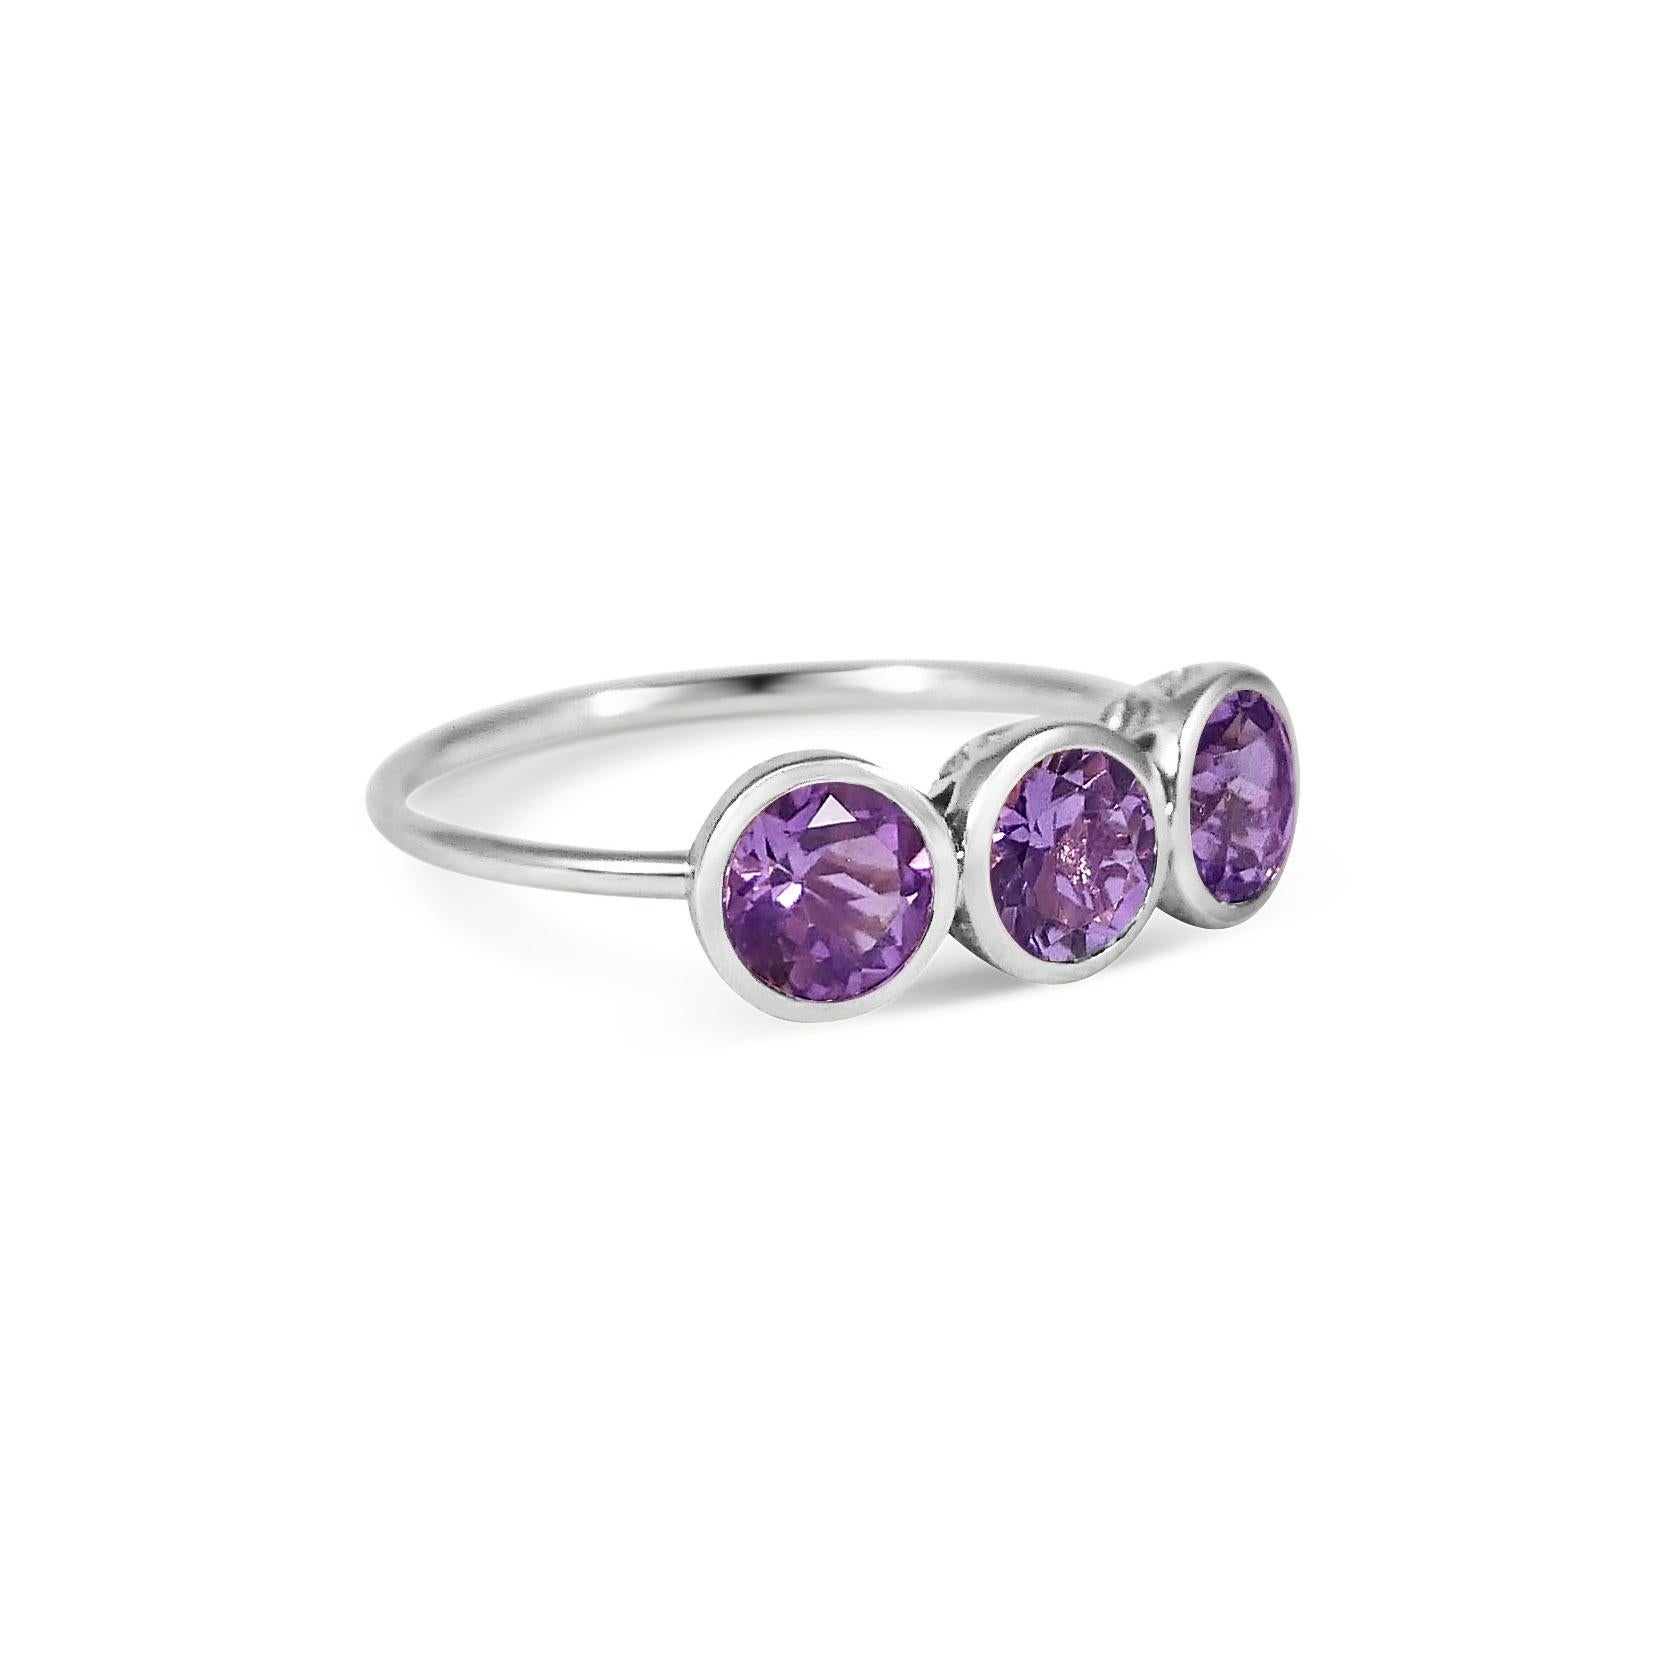 Handcrafted Round Cut 1.50 Carats Amethysts 18 Karat White Gold Three-Stone Ring. This classic three-stone or trilogy ring features round brilliant cut stones set in a rub over setting on a simple band. The 6mm natural Amethyst stones are set in